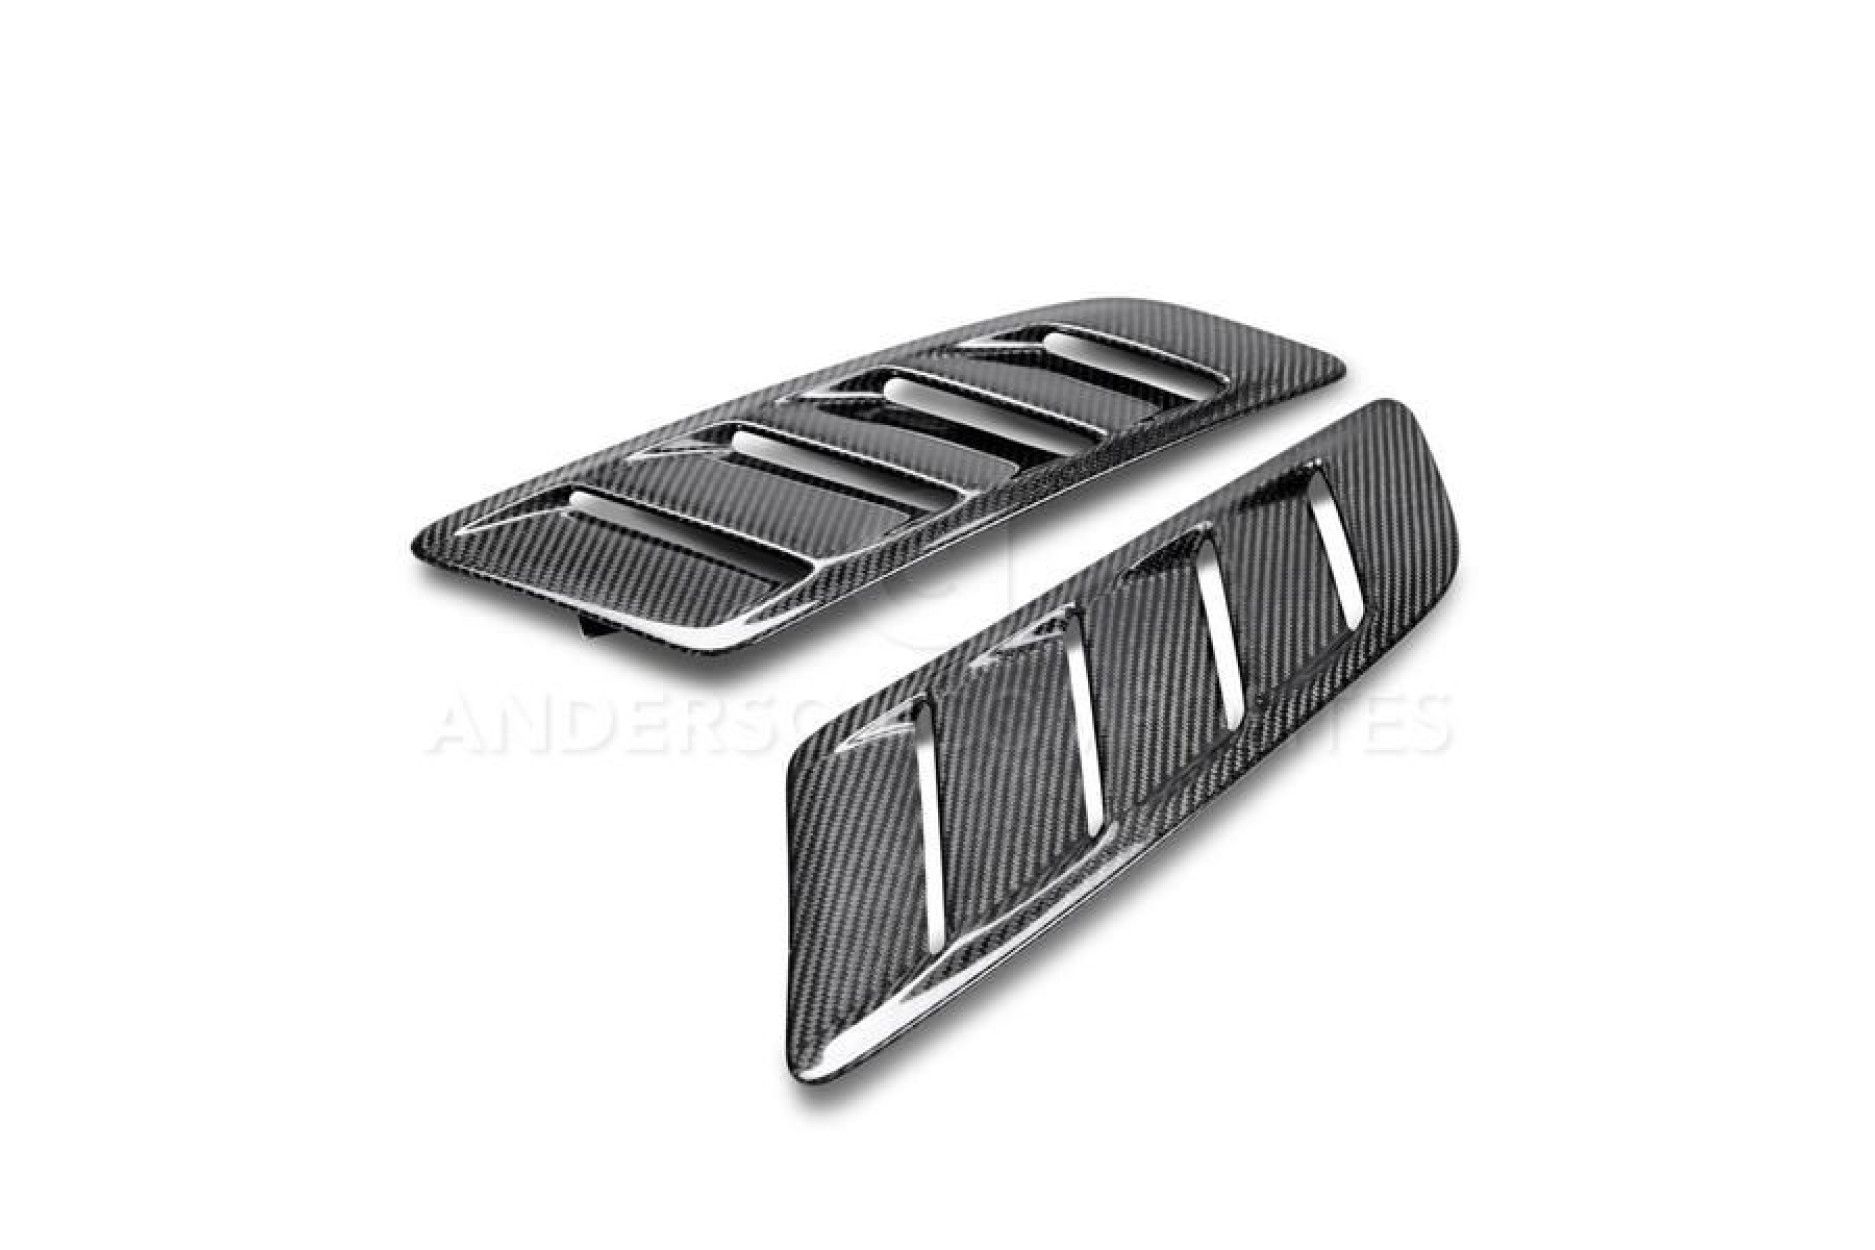 Anderson Composites Type-AB carbon fiber hood vents for 2015-2017 Ford Mustang GT